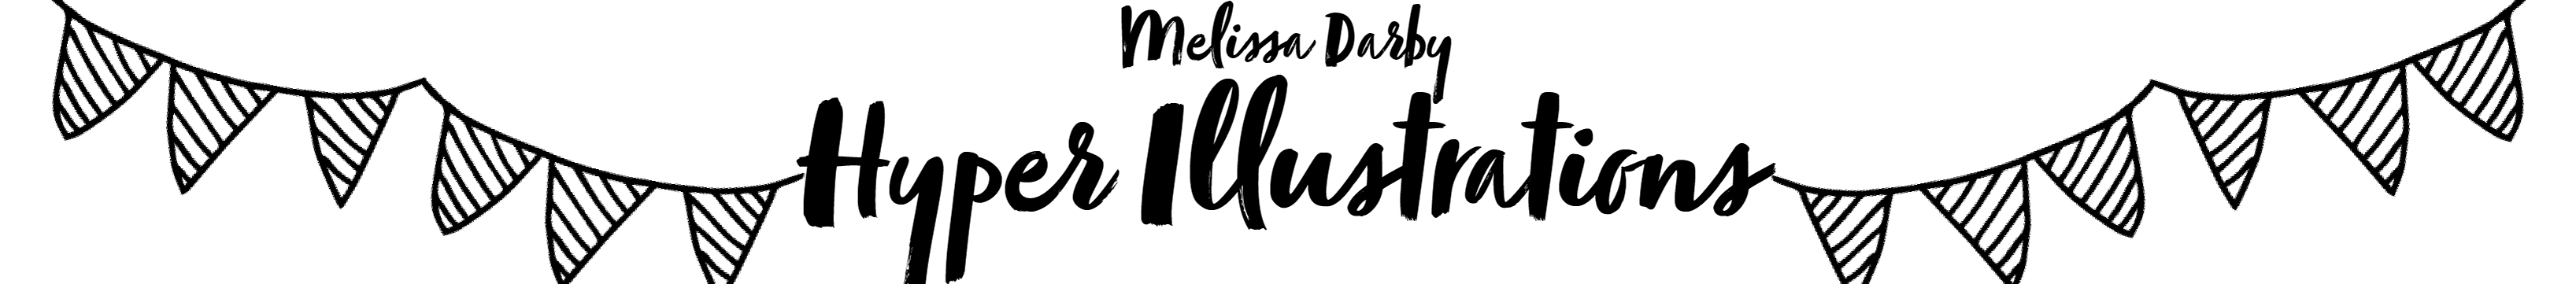 Melissa Darby's profile banner